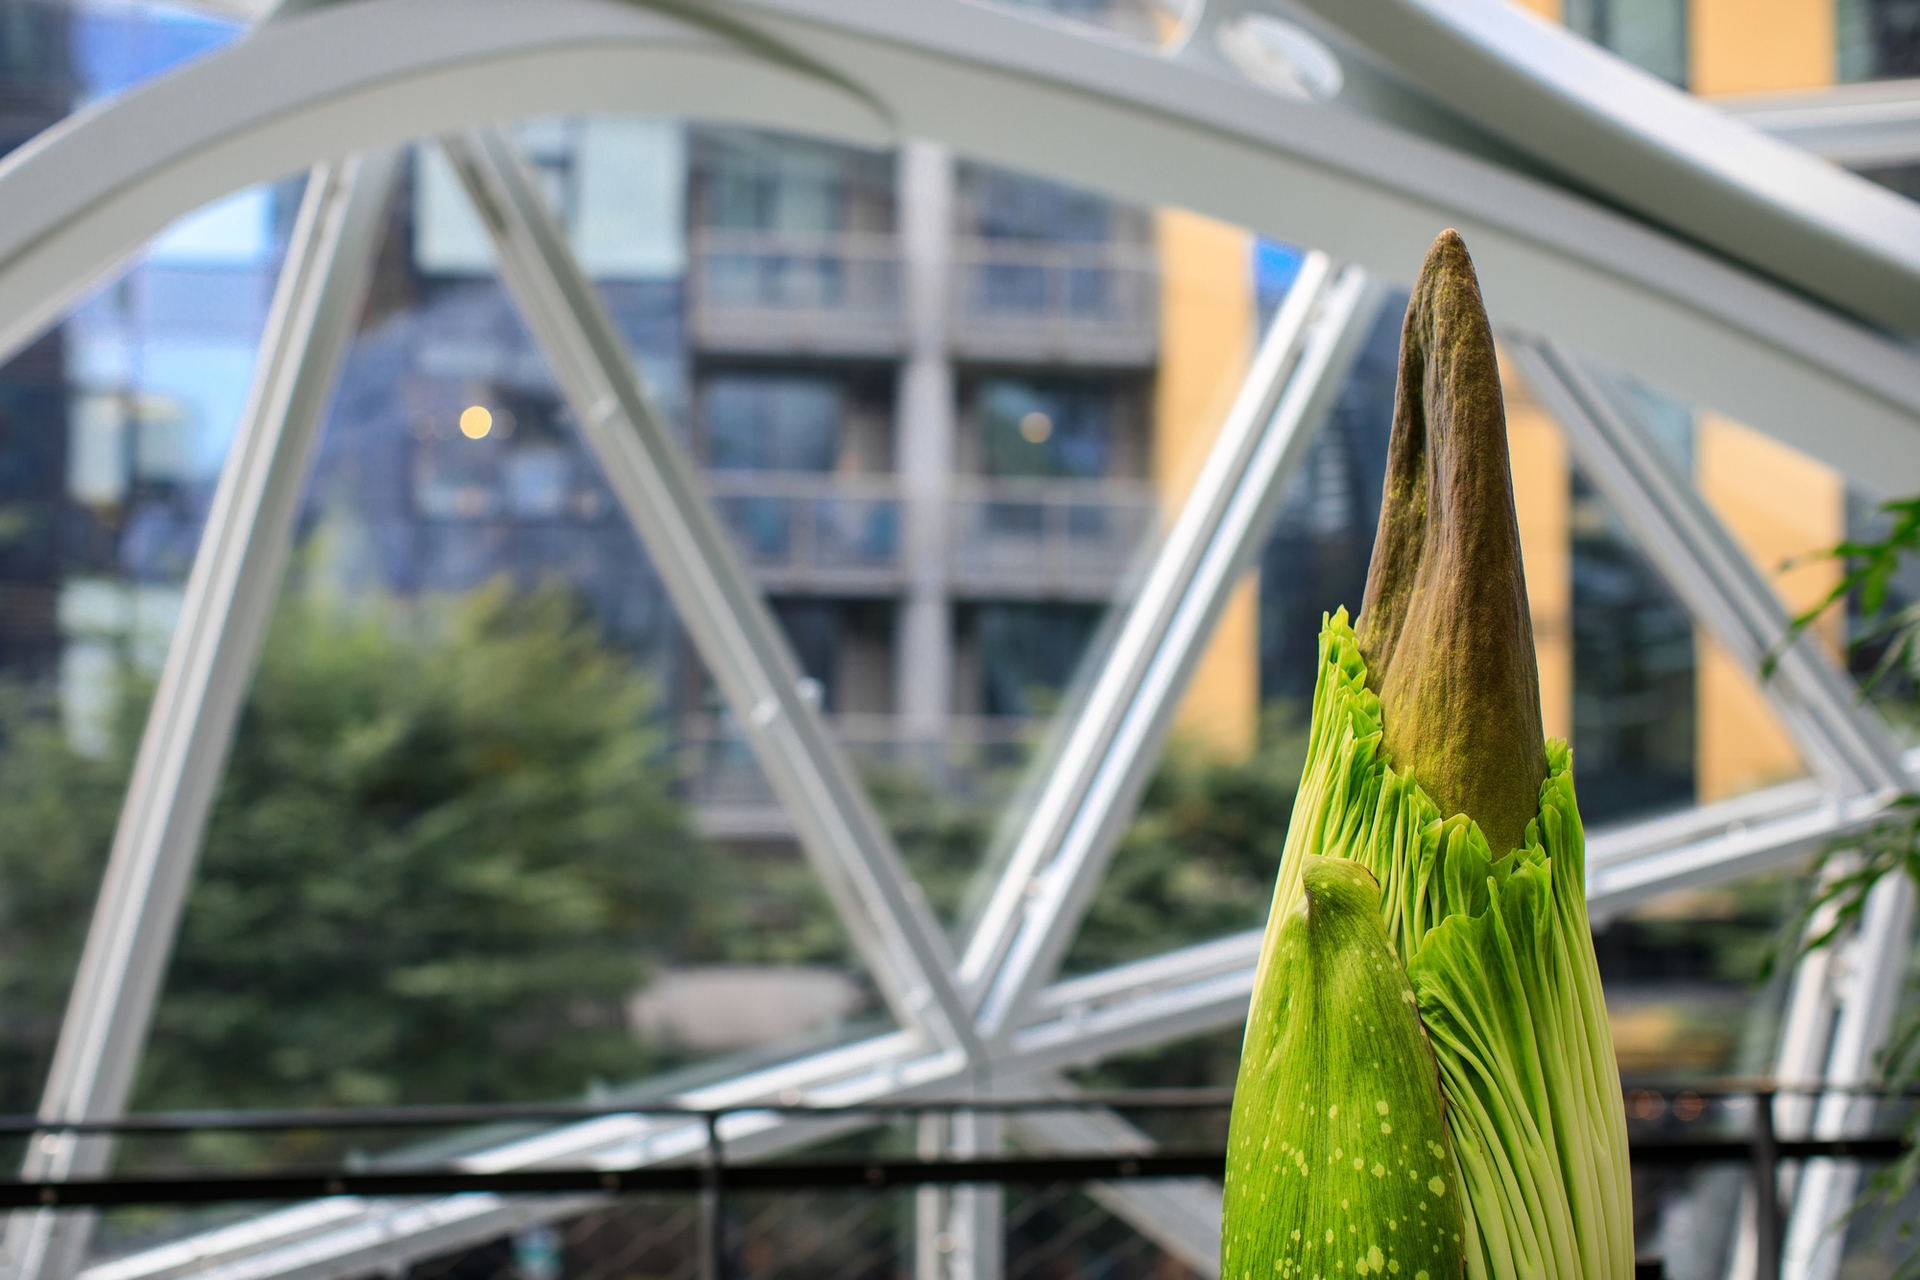 The corpse plant, in a planter, within The Spheres in Seattle, in the background glass panels of The Spheres and apartment buildings.